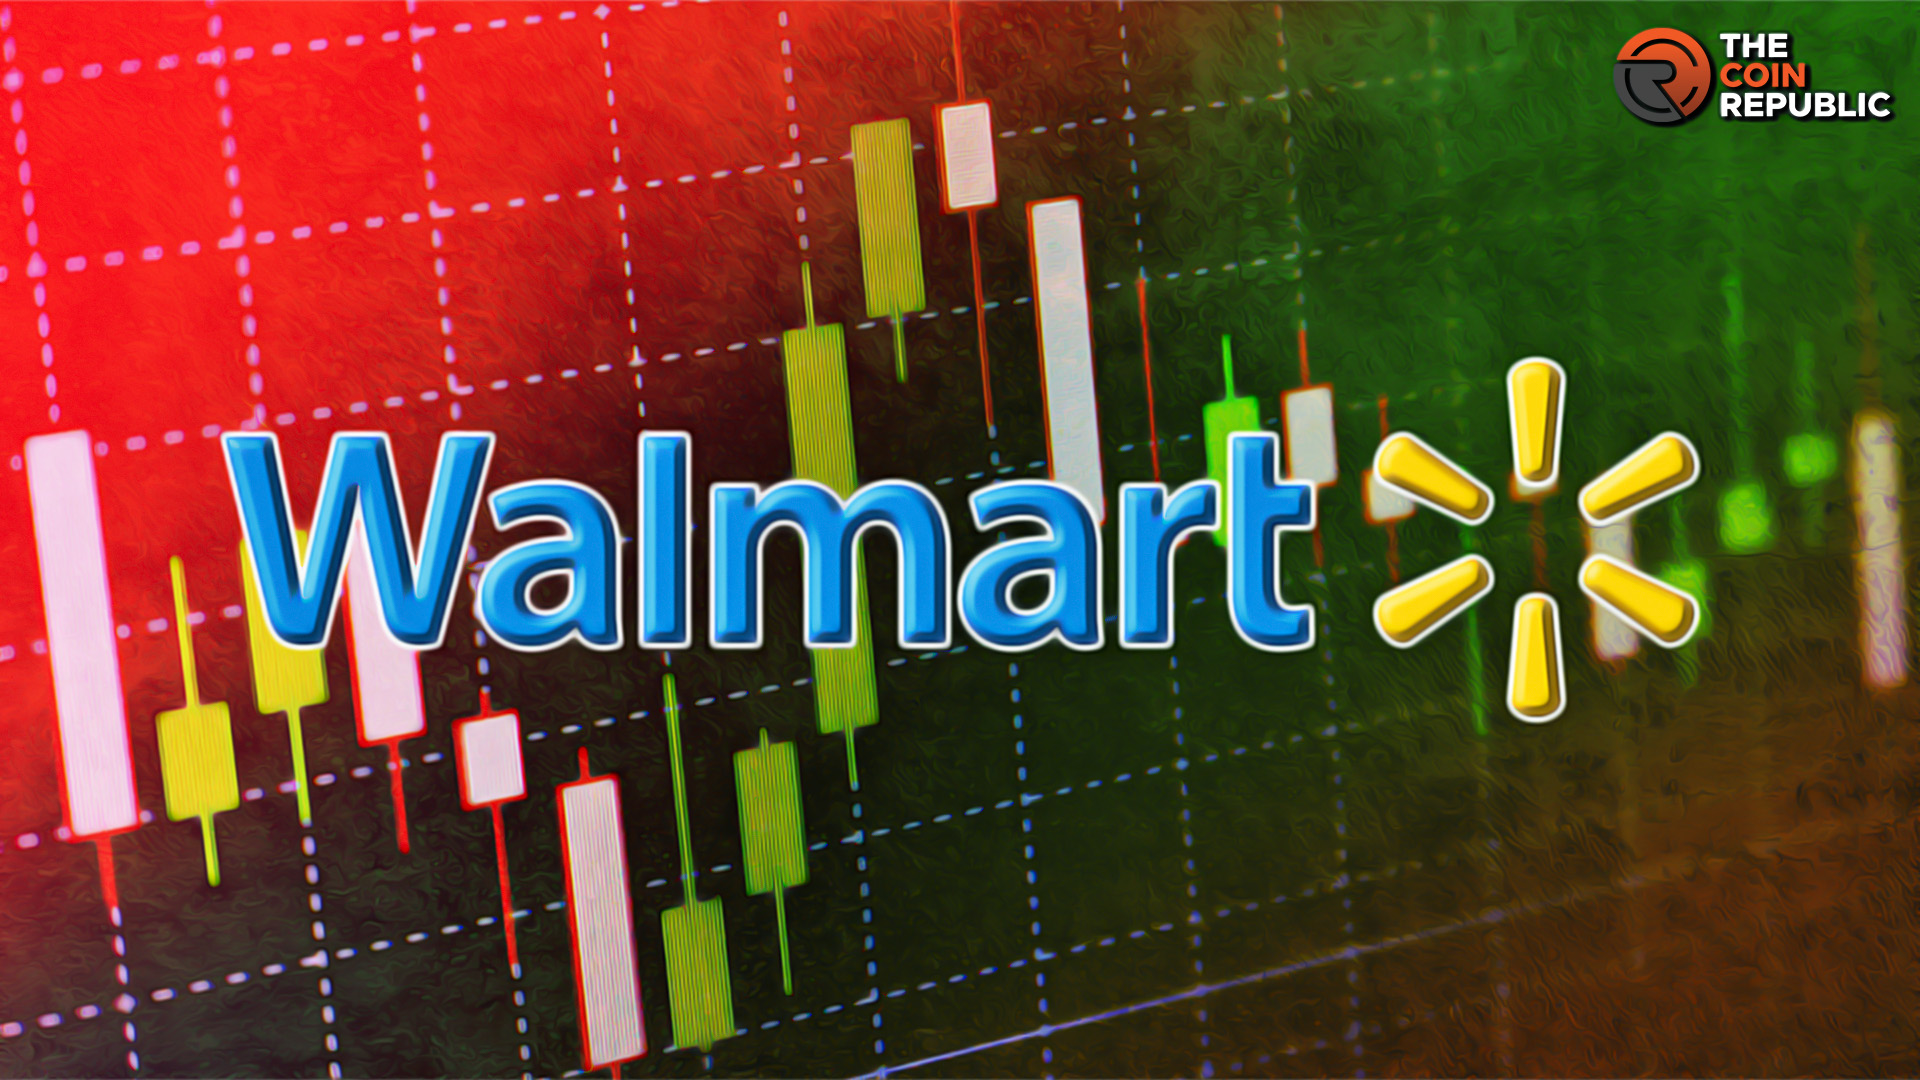 Walmart Stock Price Shows Weakness Near All-Time High: Analysts